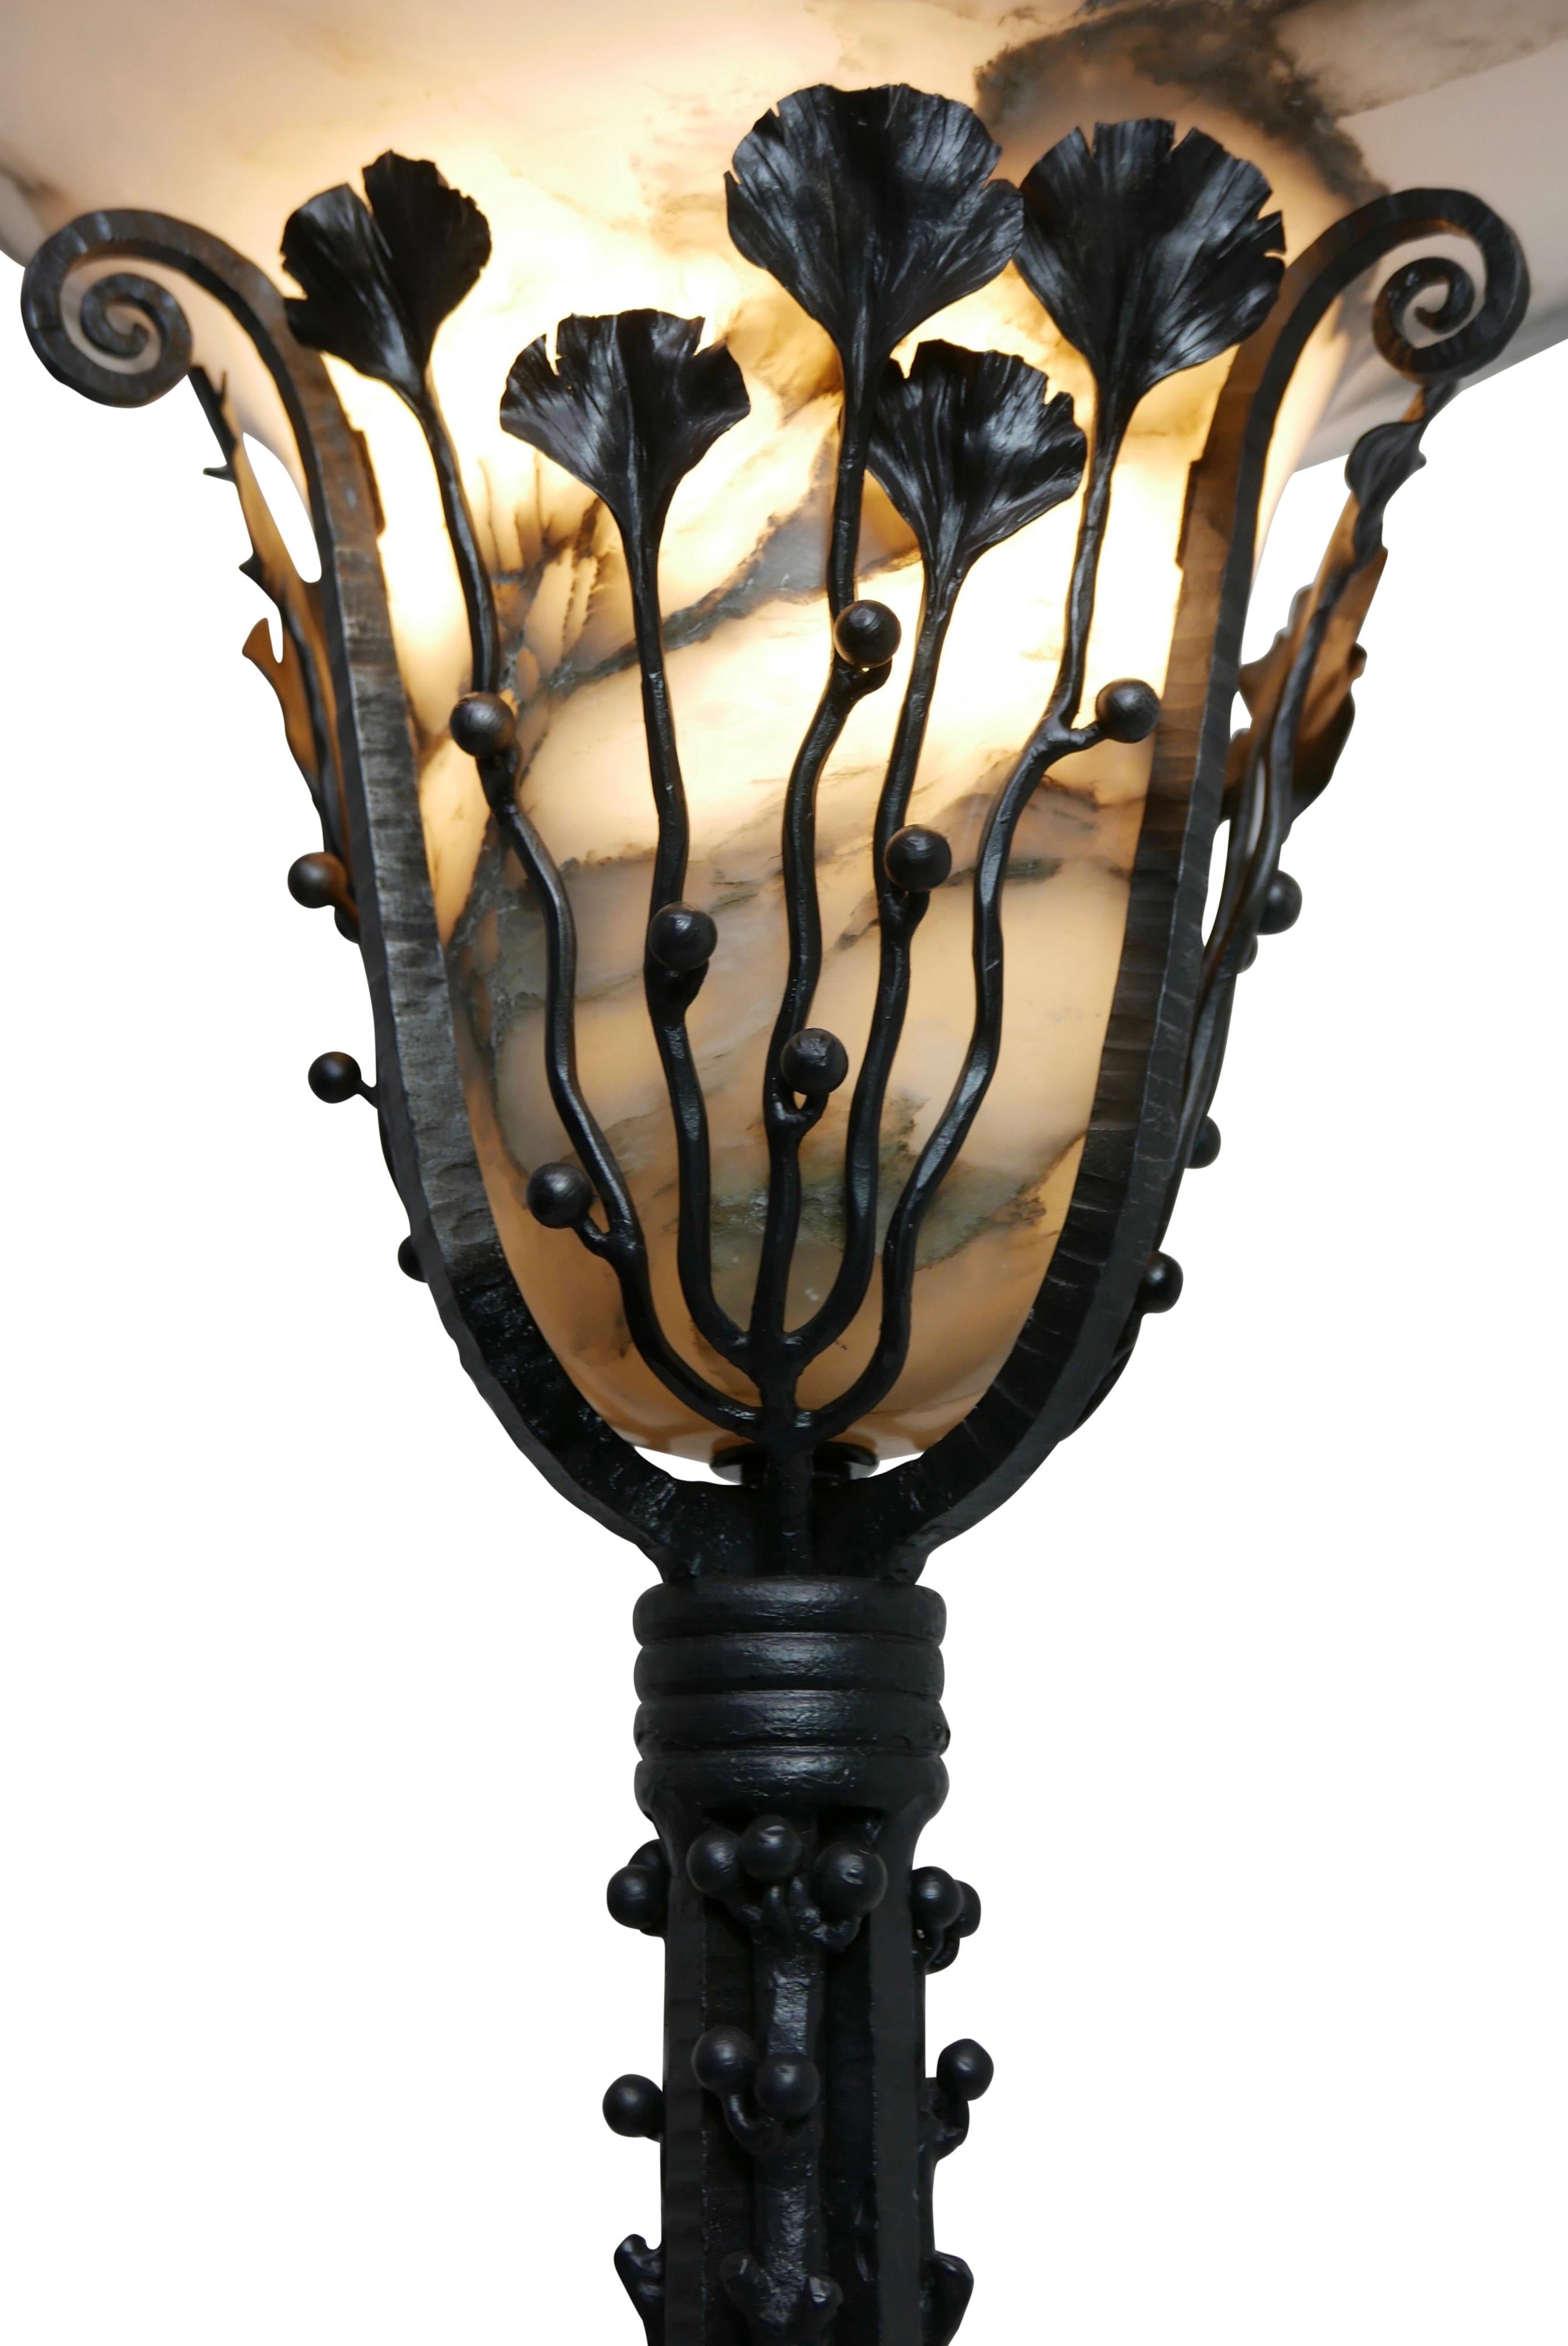 20th Century Art Deco Wrought Iron Floor Lamp with Alabaster Shade, French, circa 1920 For Sale